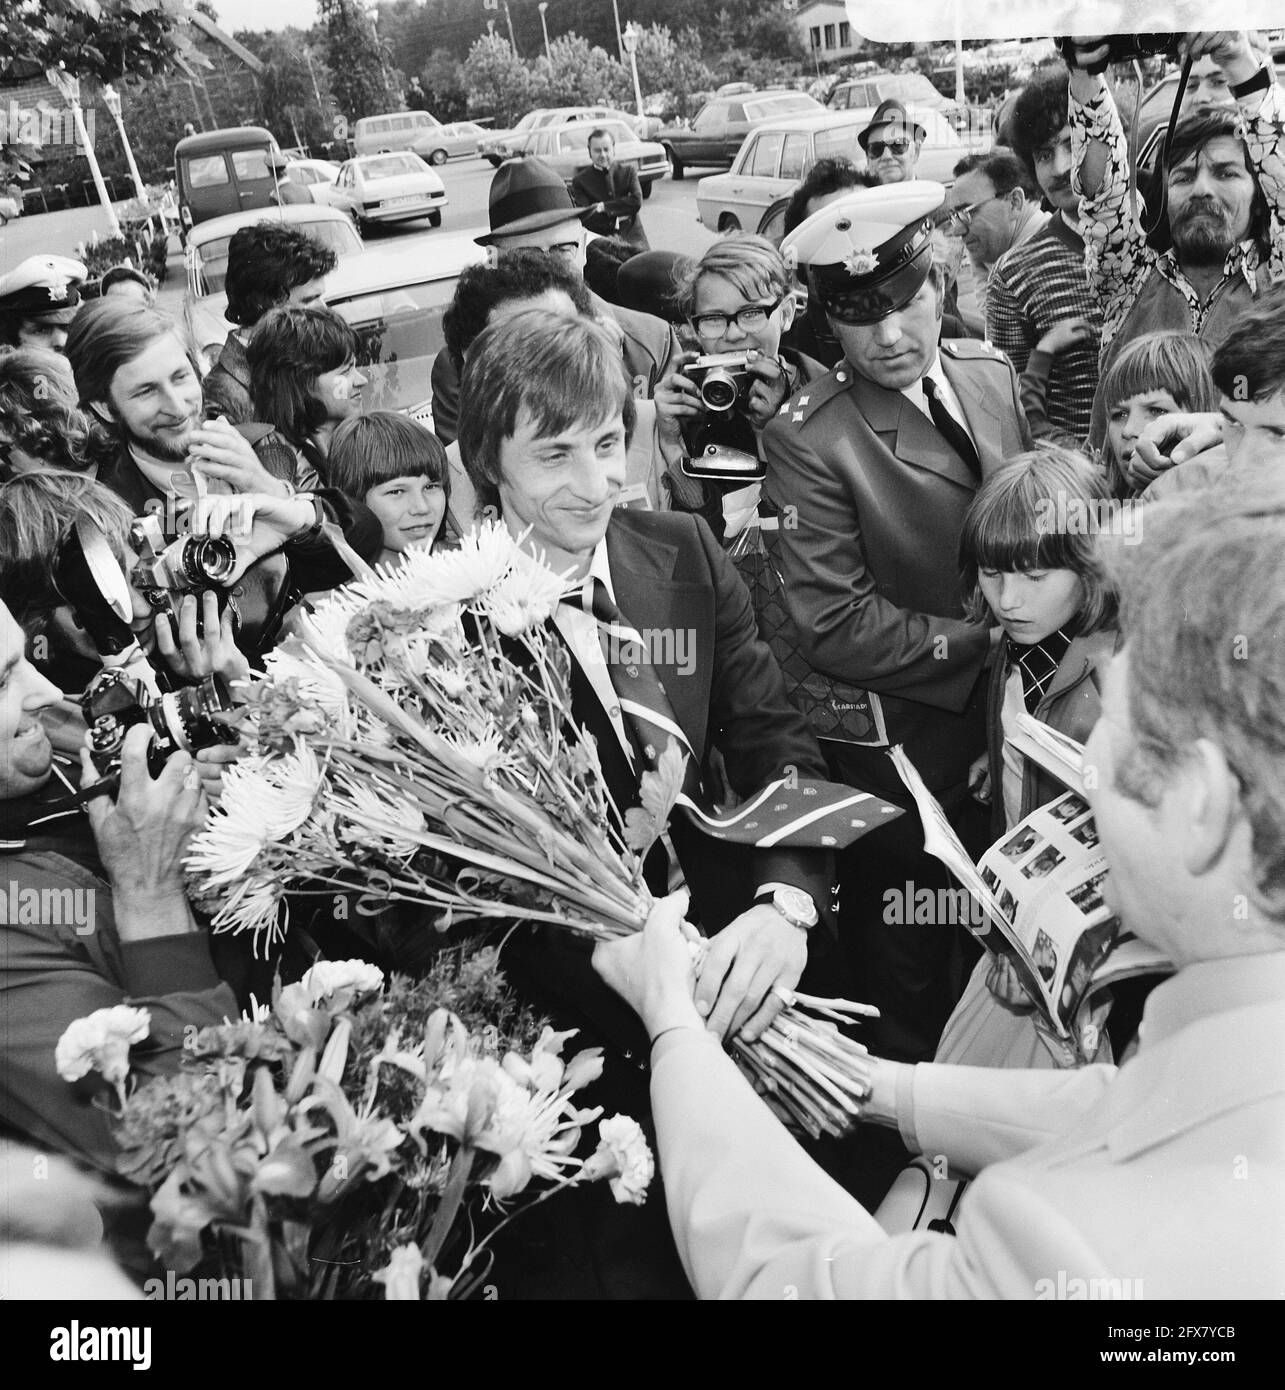 Arrival Dutch national team in Hiltrup ( West Germany ) World Cup soccer 1974; Johan Cruijff on arrival with flowers, 12 June 1974, FLOWS, teams, sports, soccer, The Netherlands, 20th century press agency photo, news to remember, documentary, historic photography 1945-1990, visual stories, human history of the Twentieth Century, capturing moments in time Stock Photo